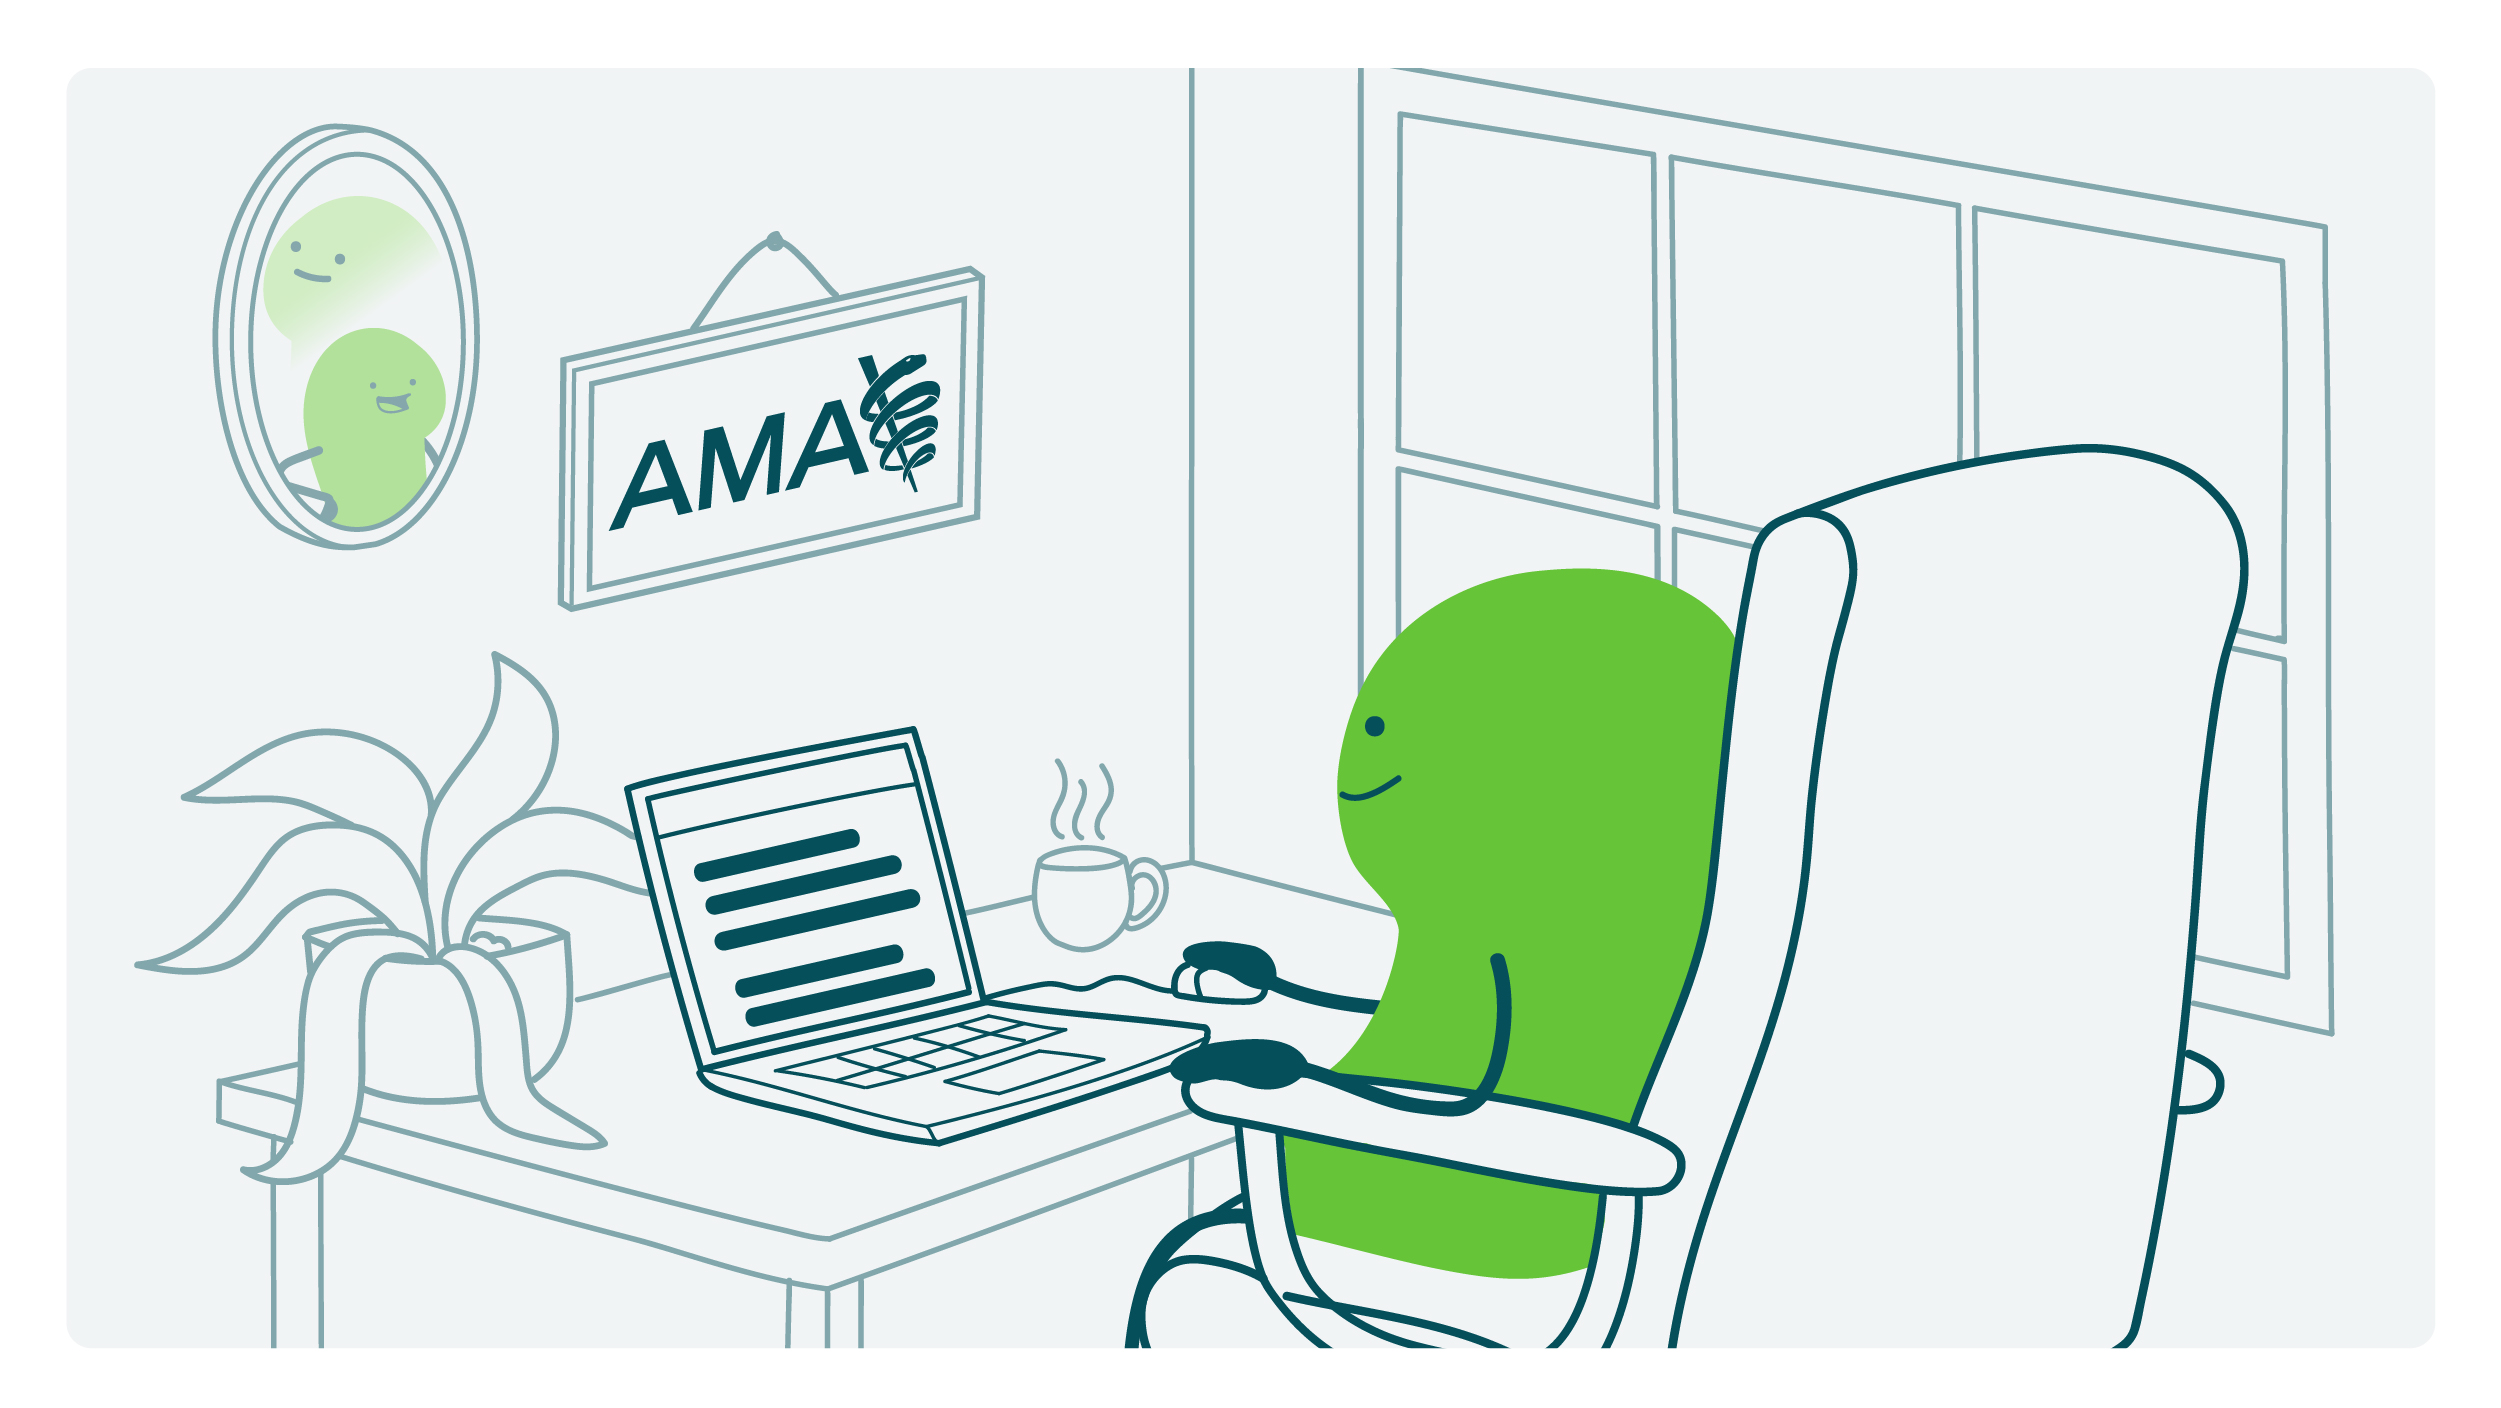 A doodle sitting in their office typing up the AMA's new policy. A framed AMA logo is on the wall.